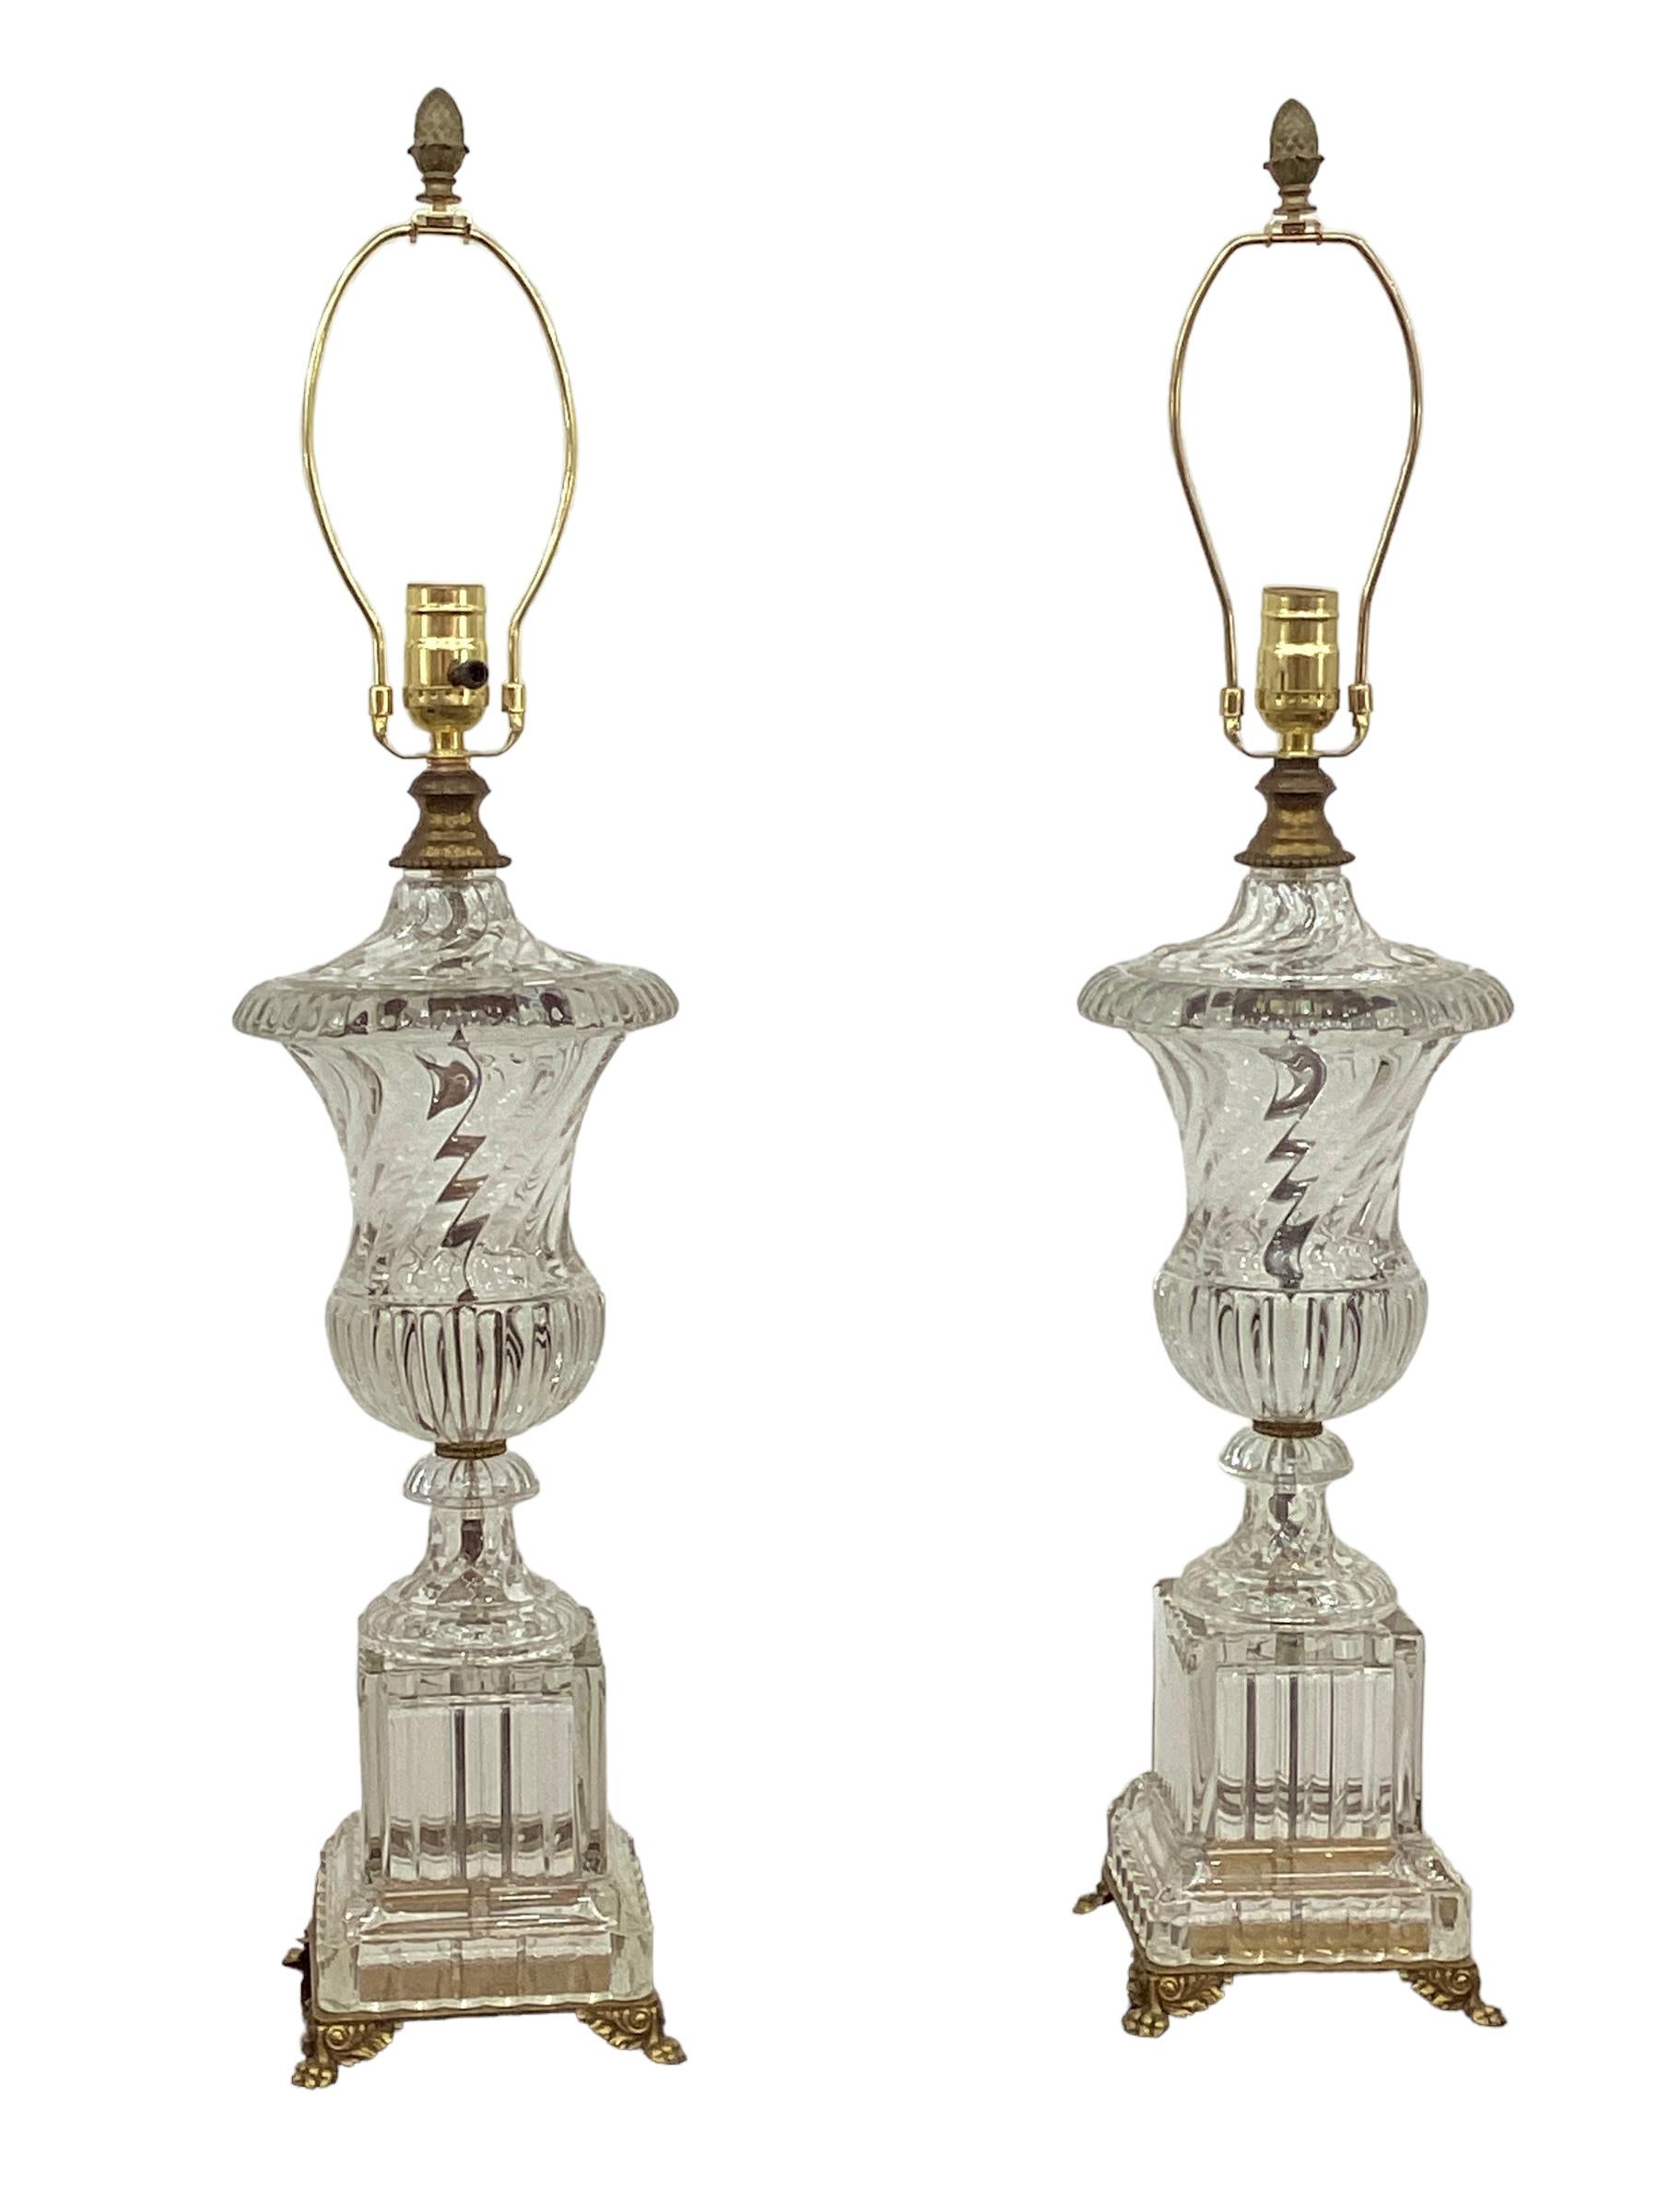 Pair of Paul Hanson Swirled Urn Glass Lamps from original Baccarat molds. Heavy leaded glass urns in the classic Baccarat swirled design sits atop a square plinth. The lamps are mounted on square brass bases with paw feet. Wired and in working